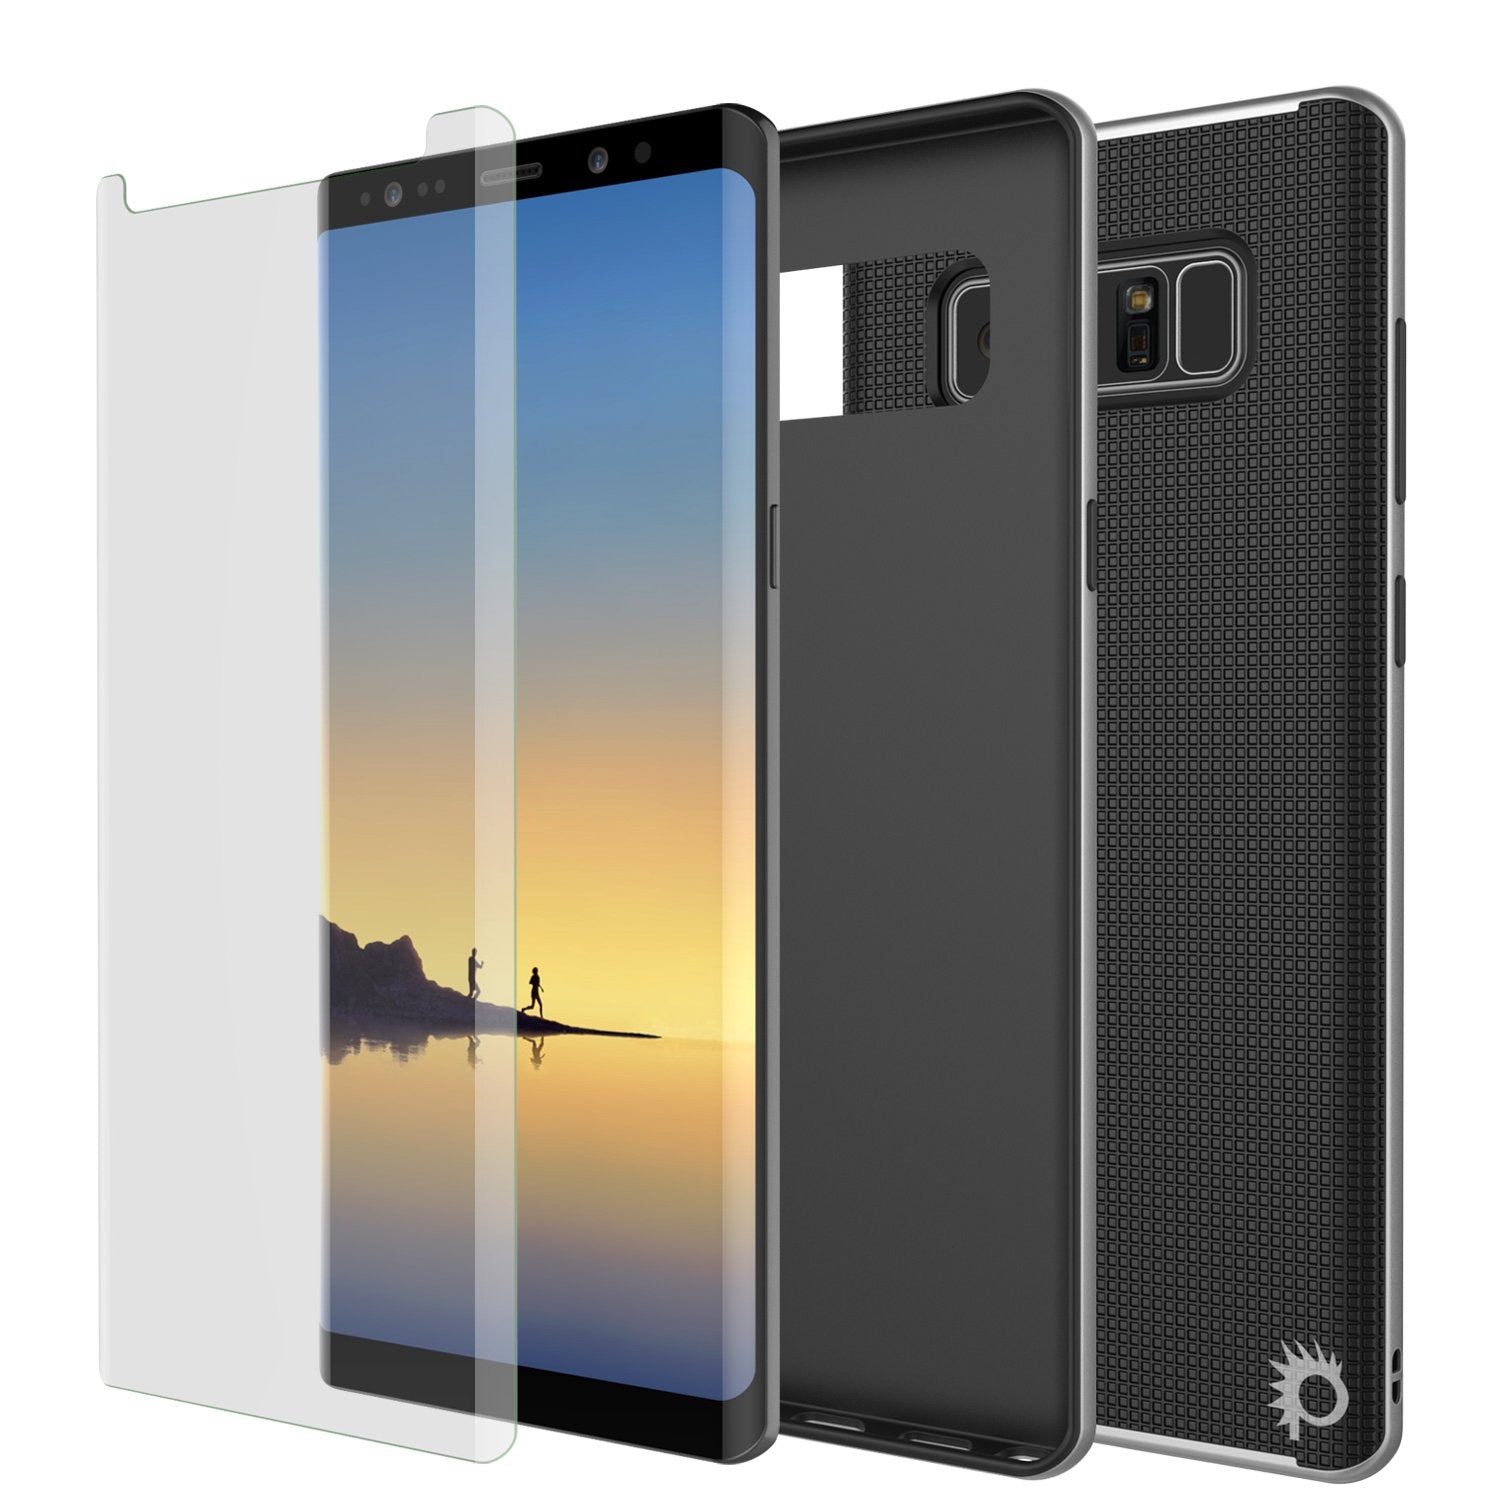 Galaxy Note 8 Case, PunkCase [Stealth Series] Hybrid 3-Piece Shockproof Dual Layer Cover [Non-Slip] [Soft TPU + PC Bumper] with PUNKSHIELD Screen Protector for Samsung Note 8 [Silver] - PunkCase NZ